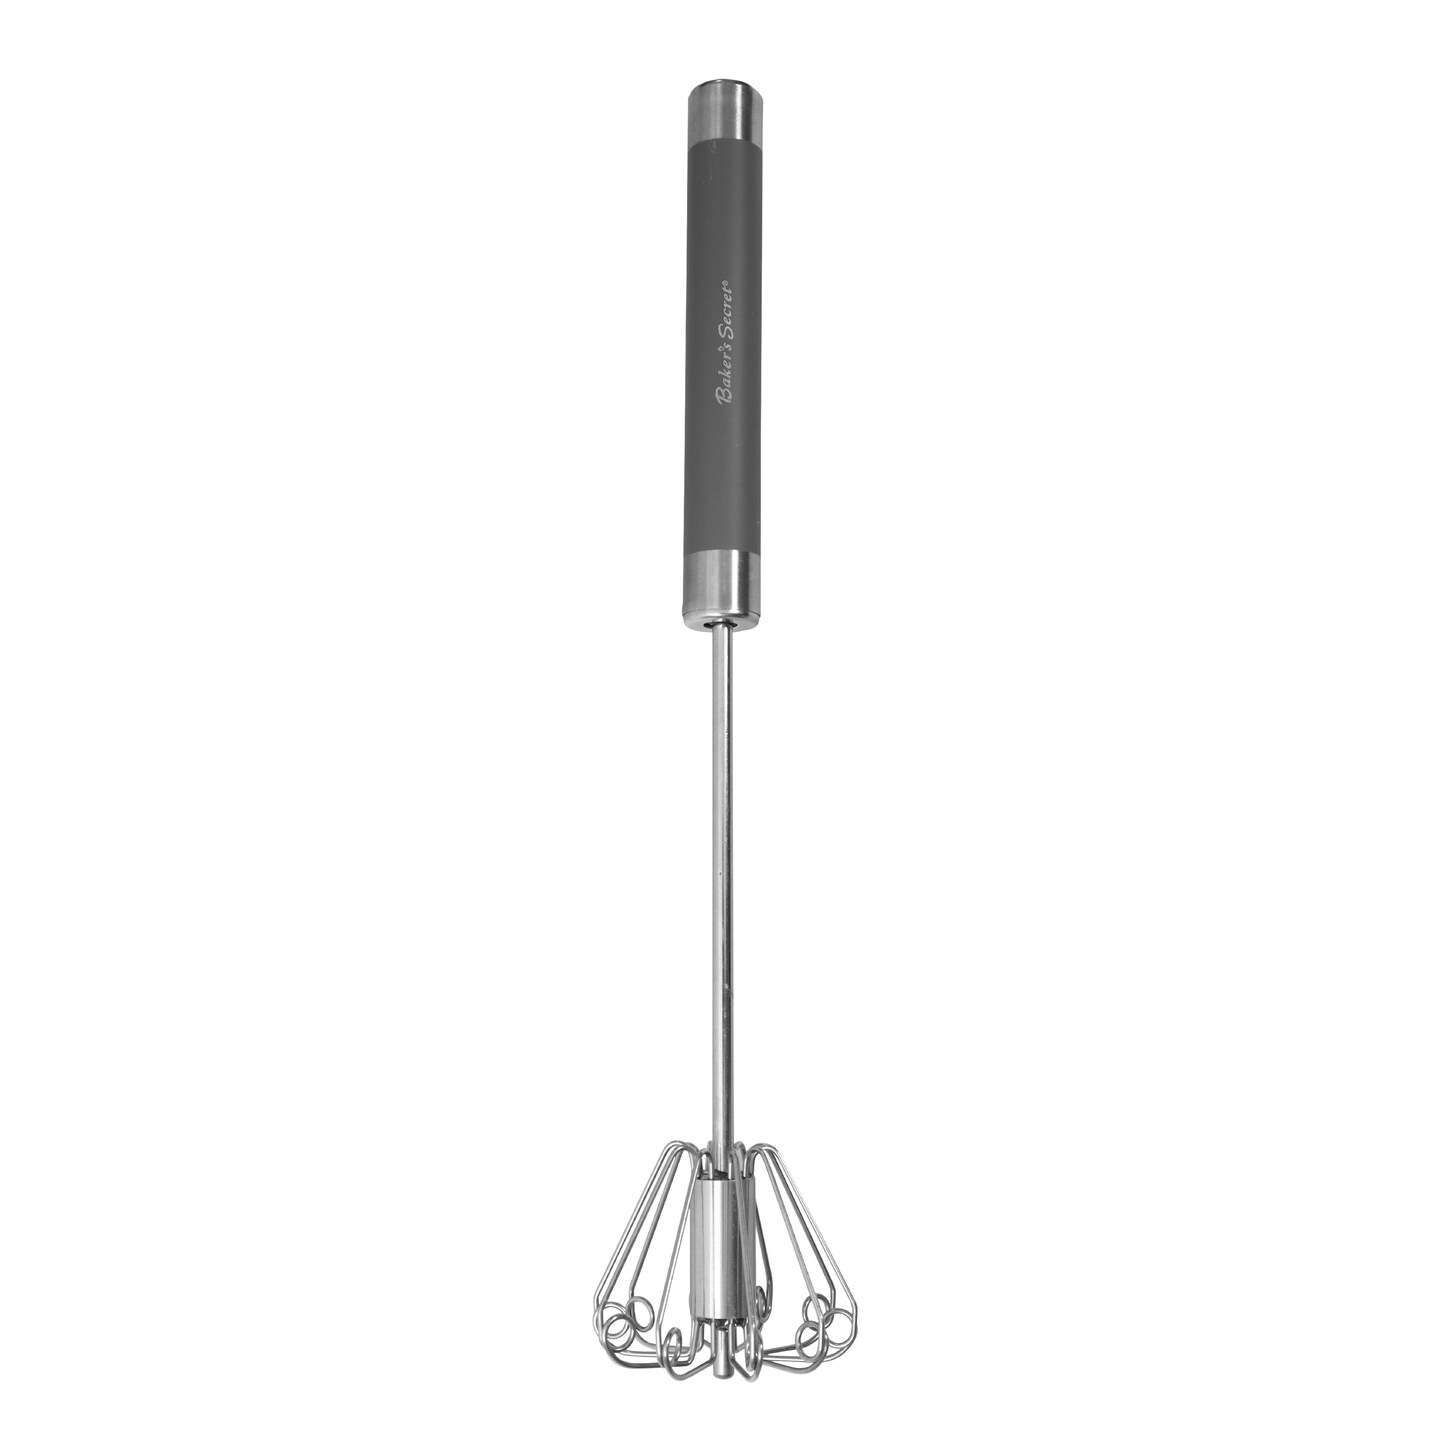 STAINLESS STEEL BALLOON WHISK WITH HOOK - PURCHASE OF KITCHEN UTENSILS